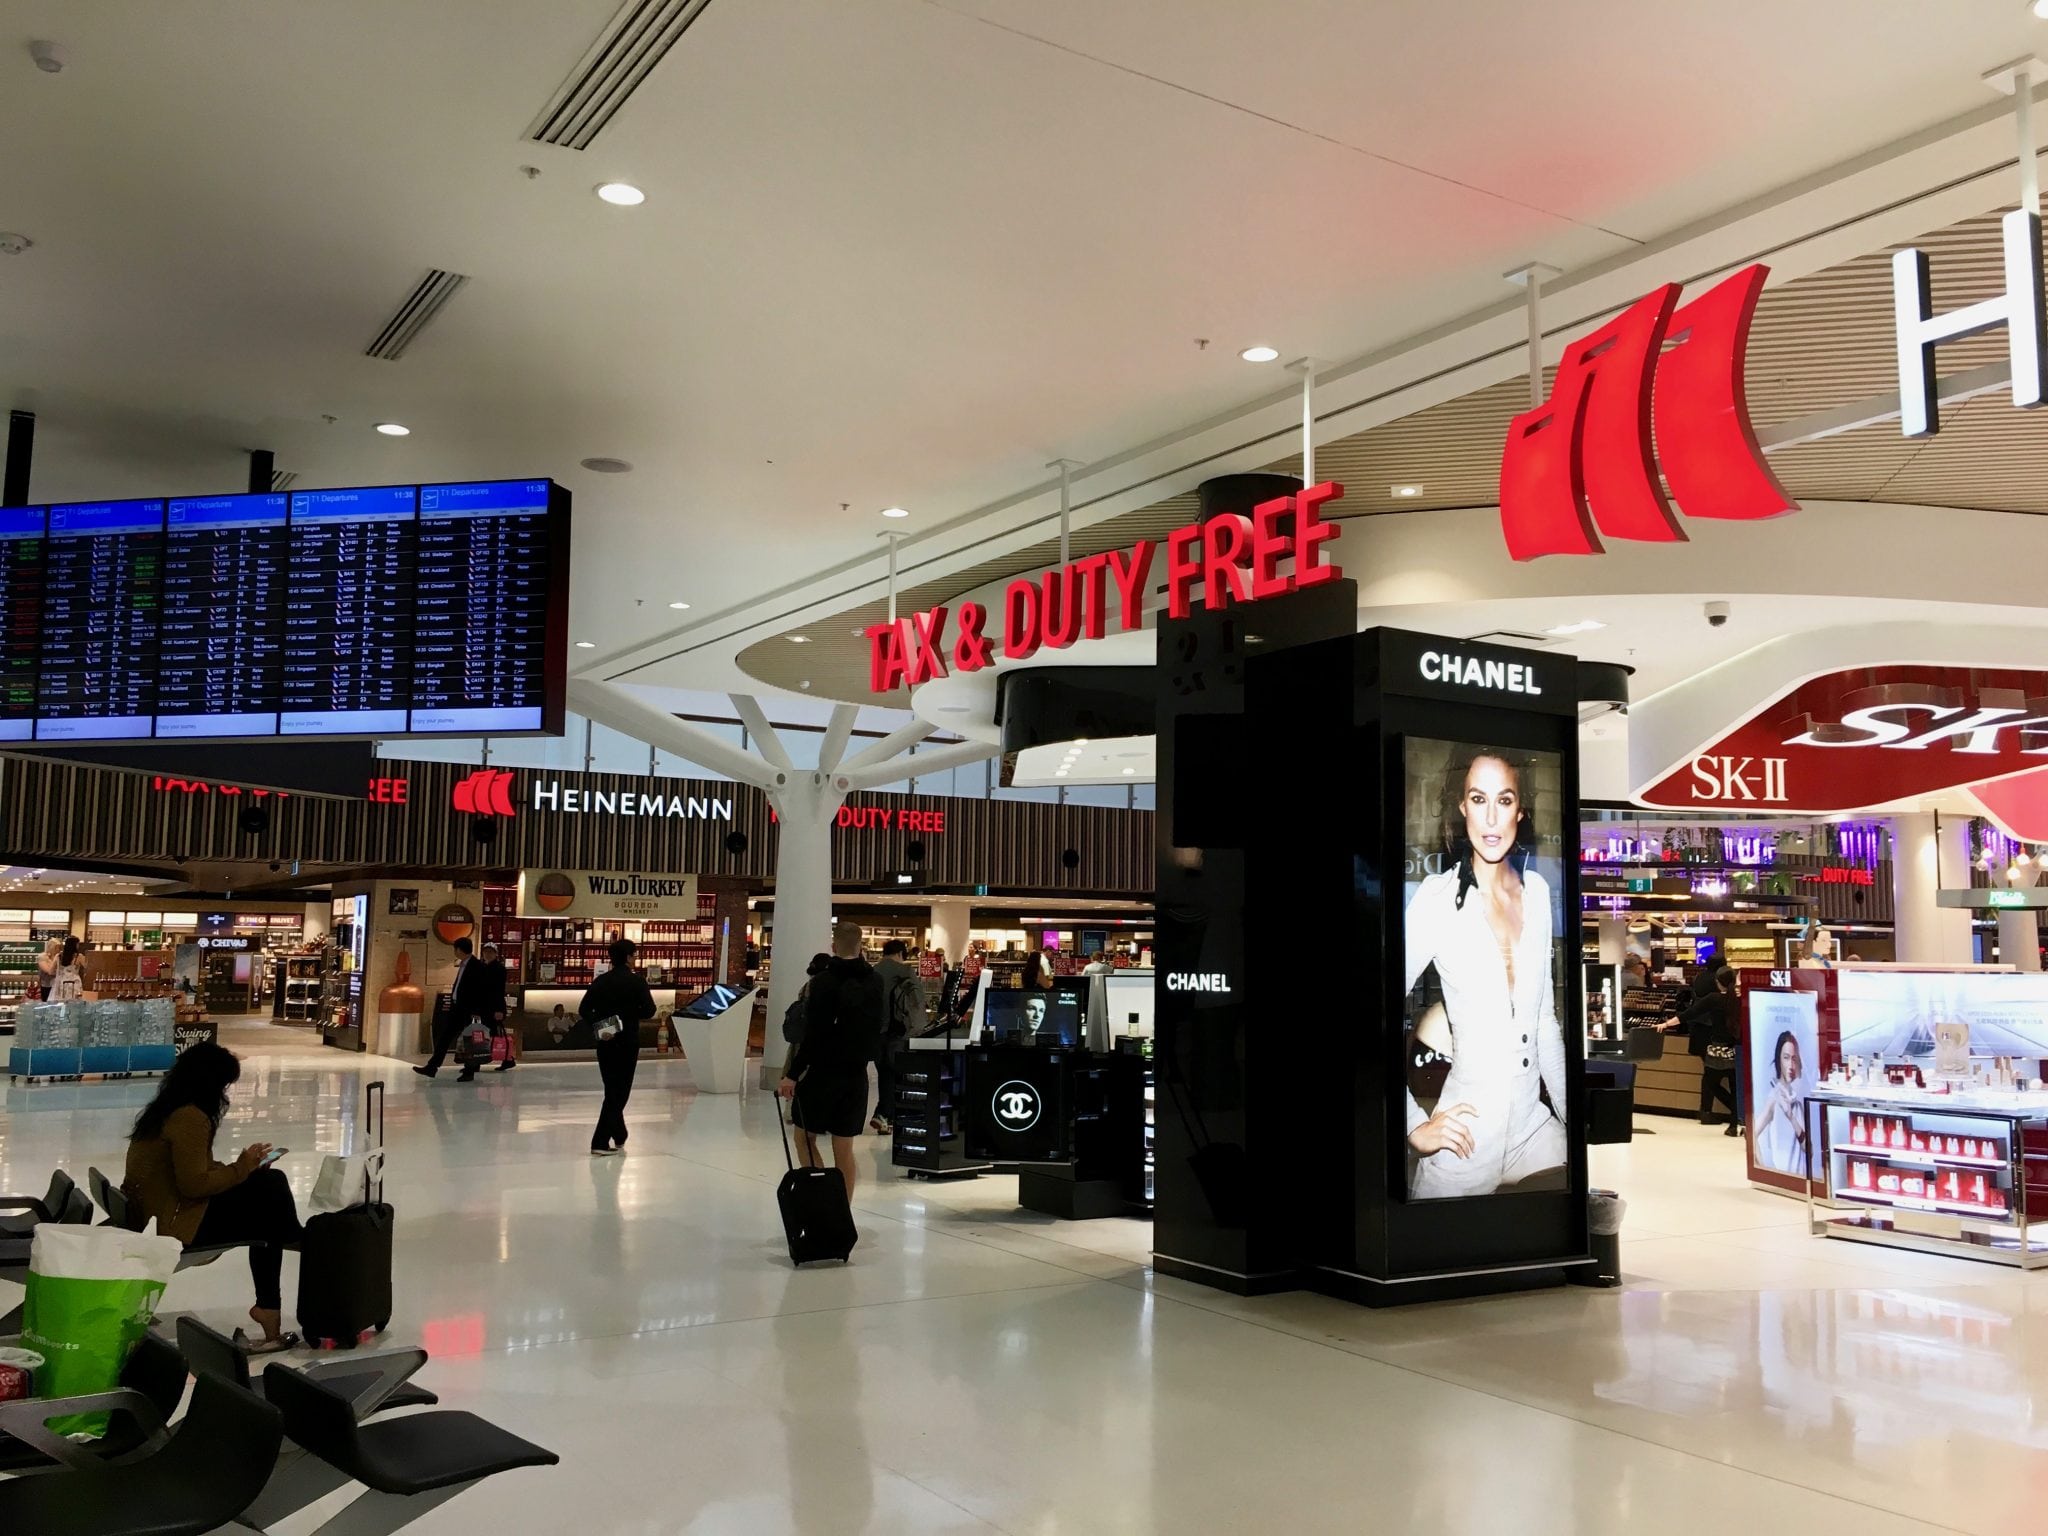 Duty free shopping in Sydney, Australia's international airport. The airport may once again see activity if the Australian prime minister's plan goes into effect. 